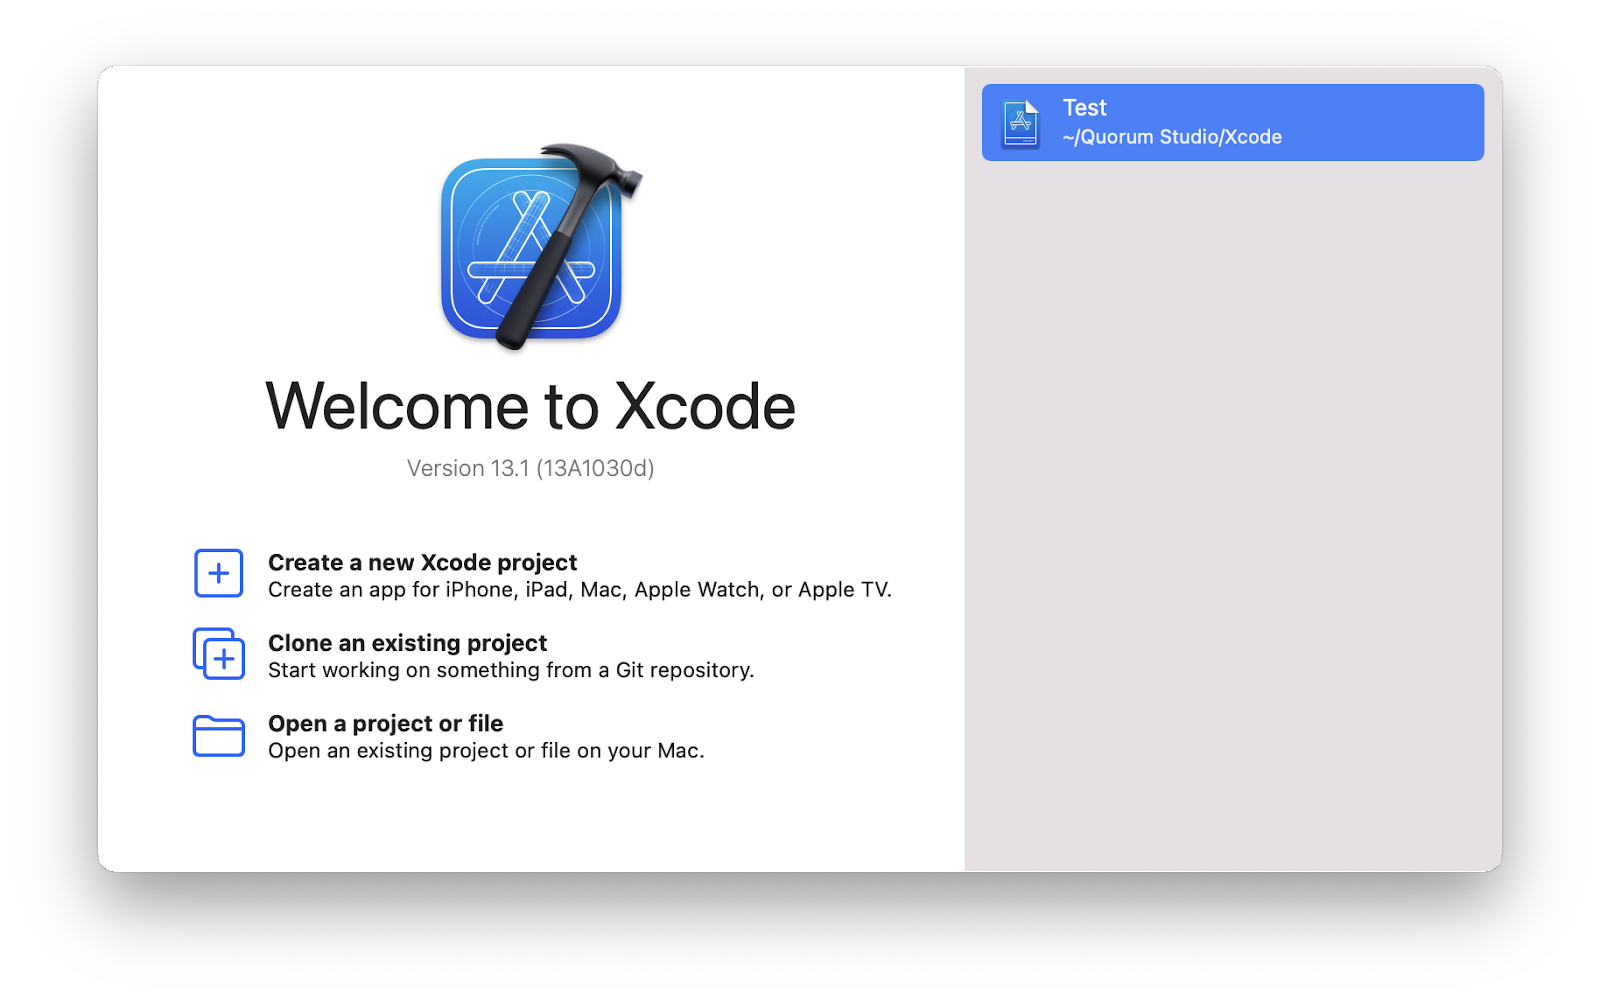 The window for xcode when there is no project open.